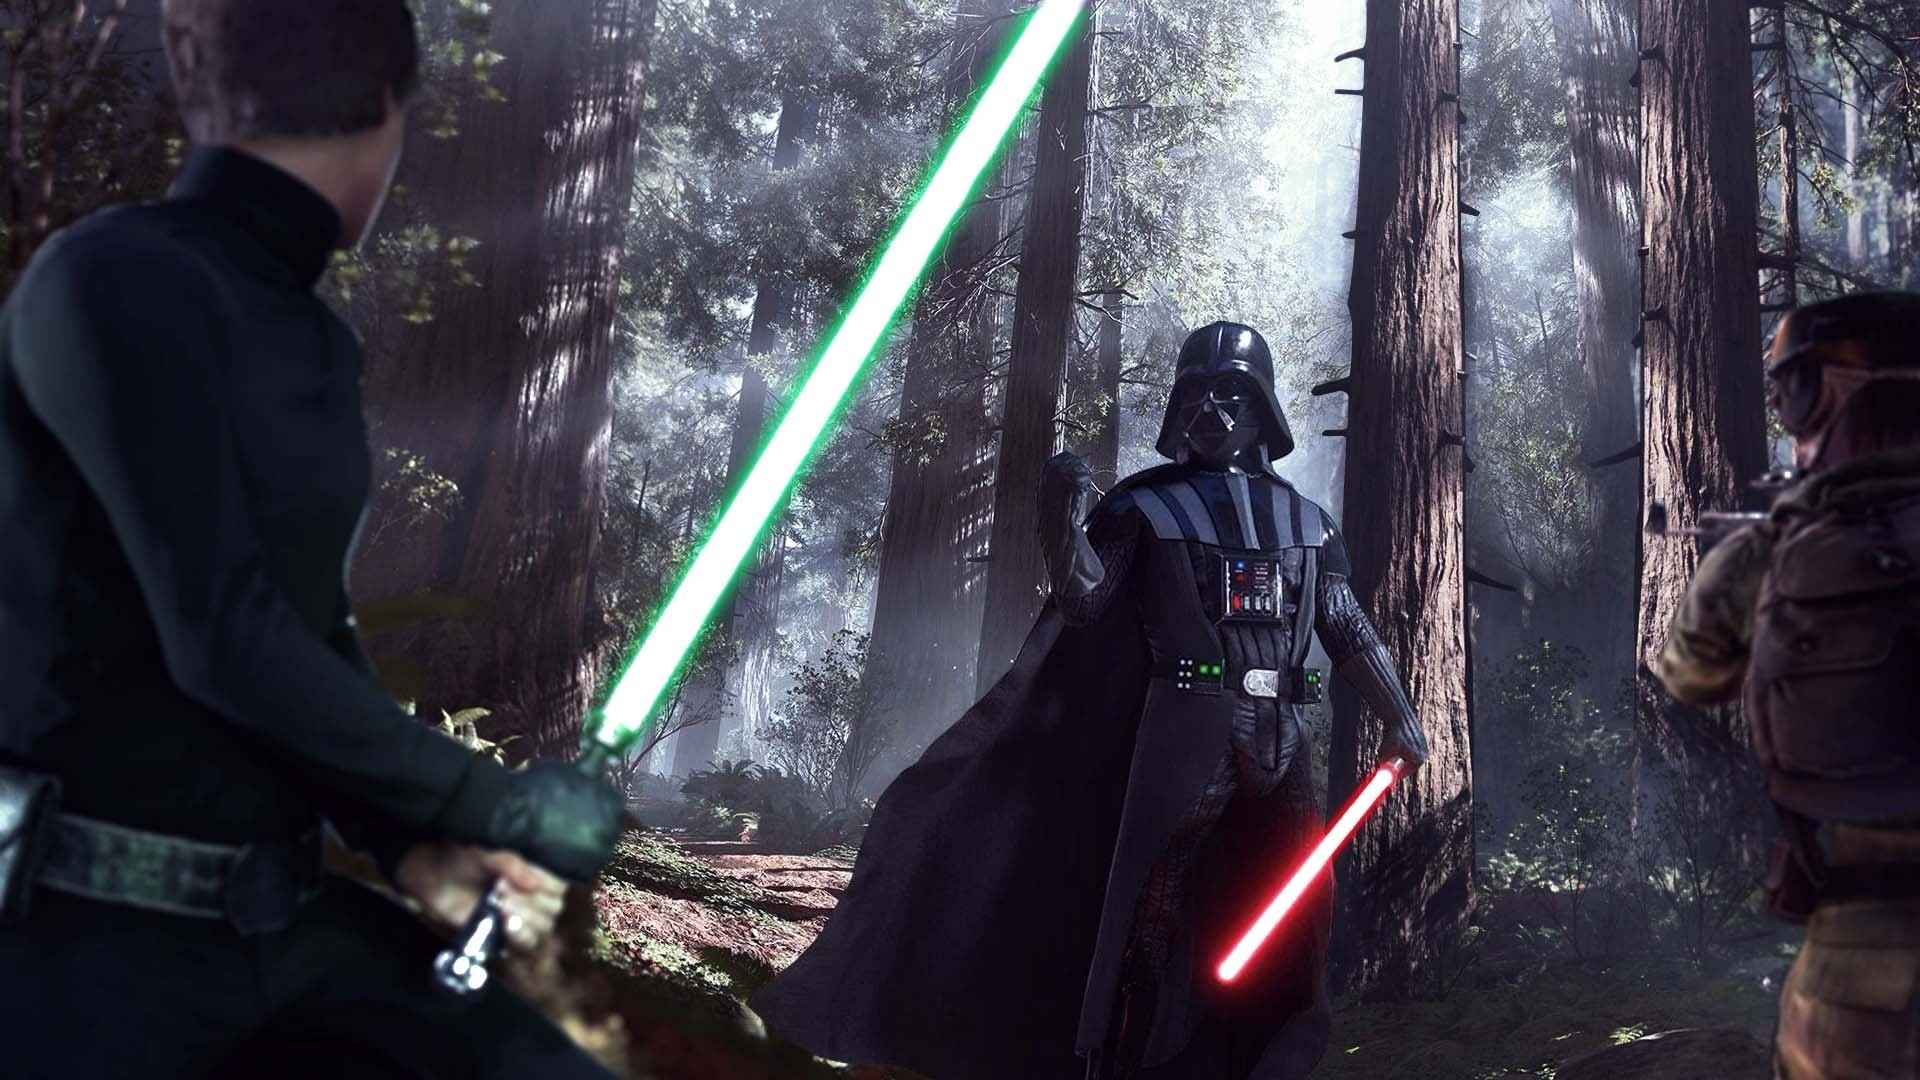 1920x1080 Star Wars Battlefront Luke vs Darth Vader Wallpaper With Download by Gully